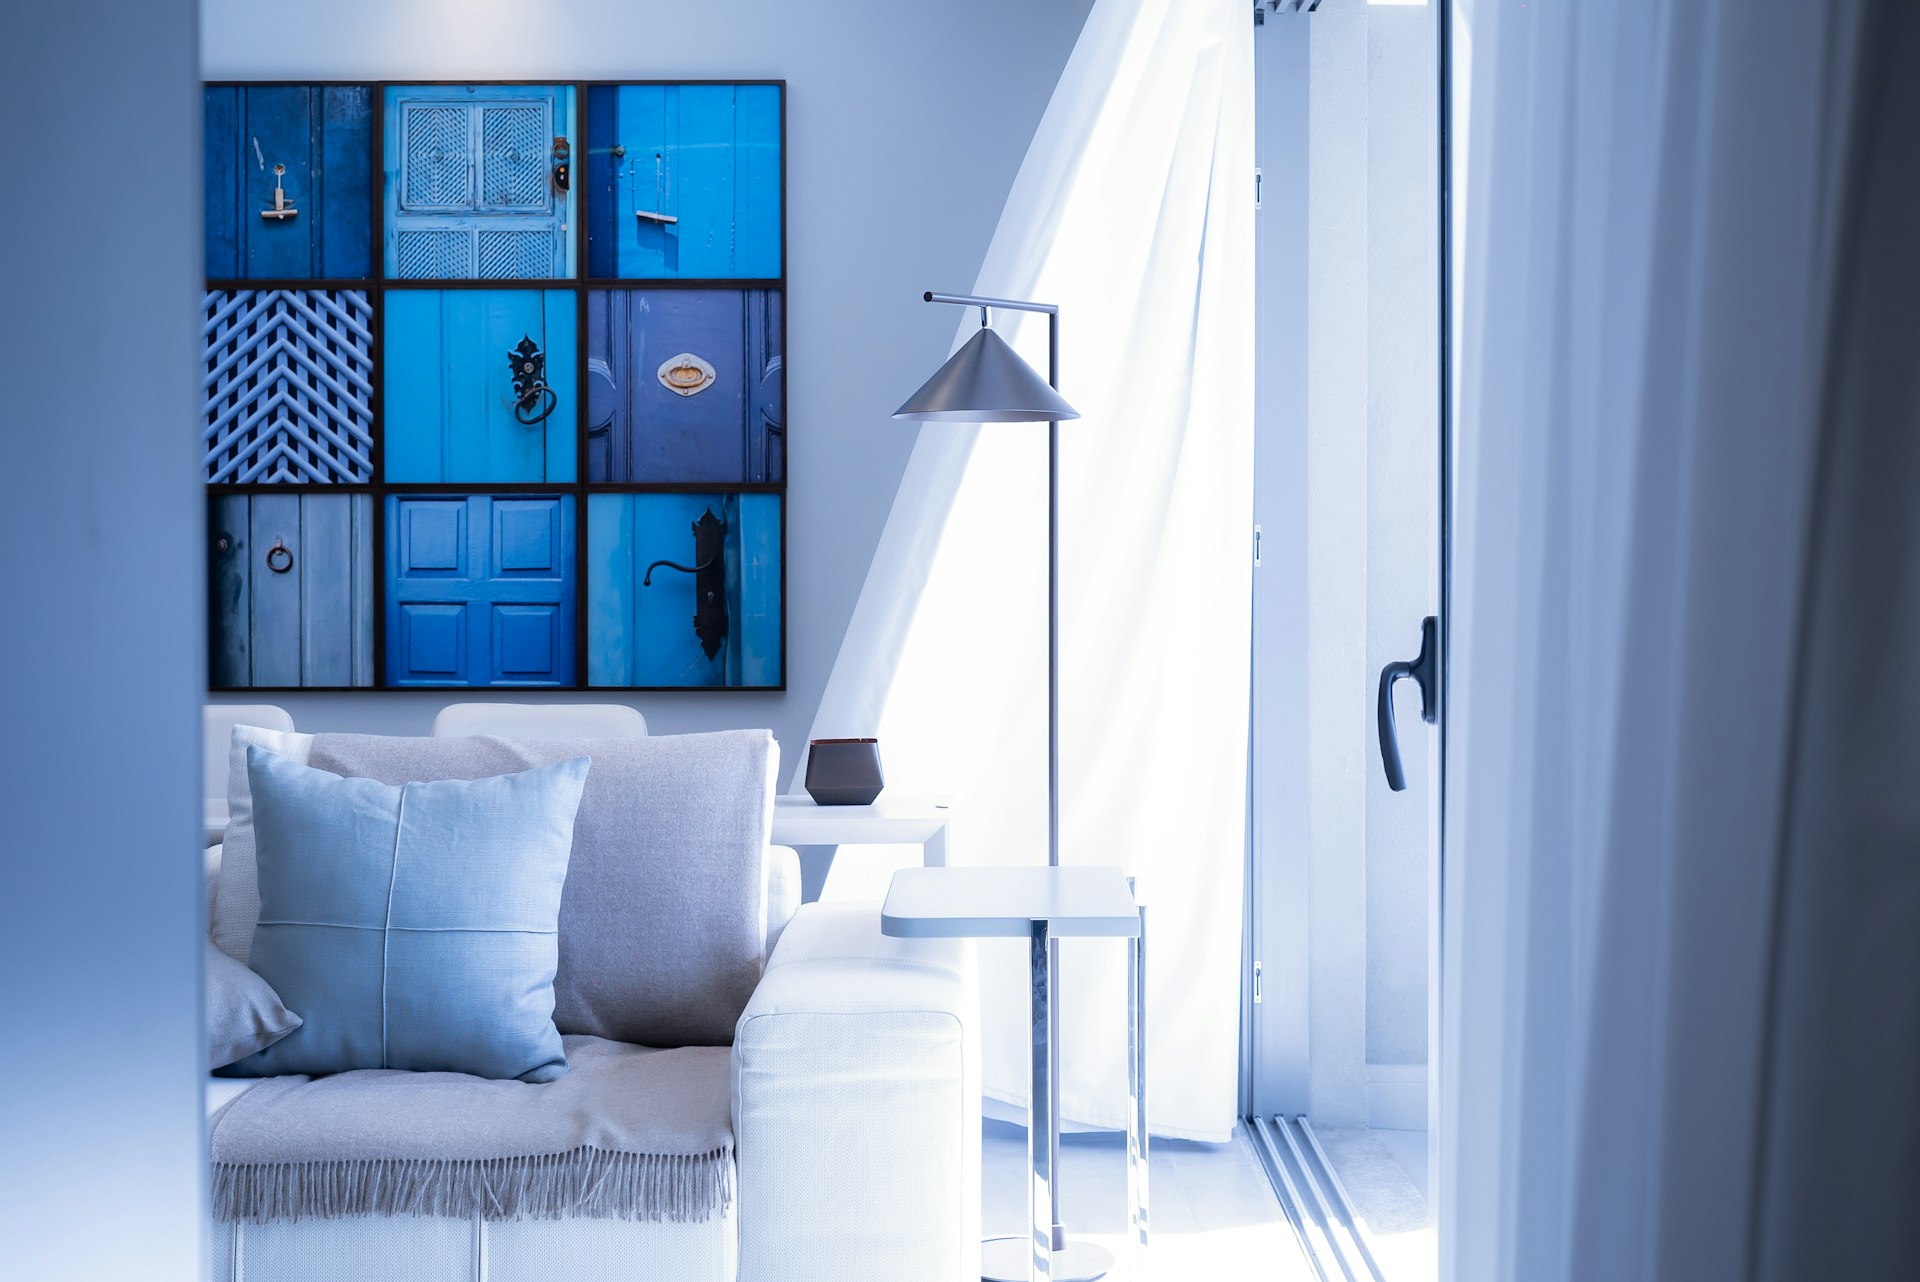 A beautifully designed blue room